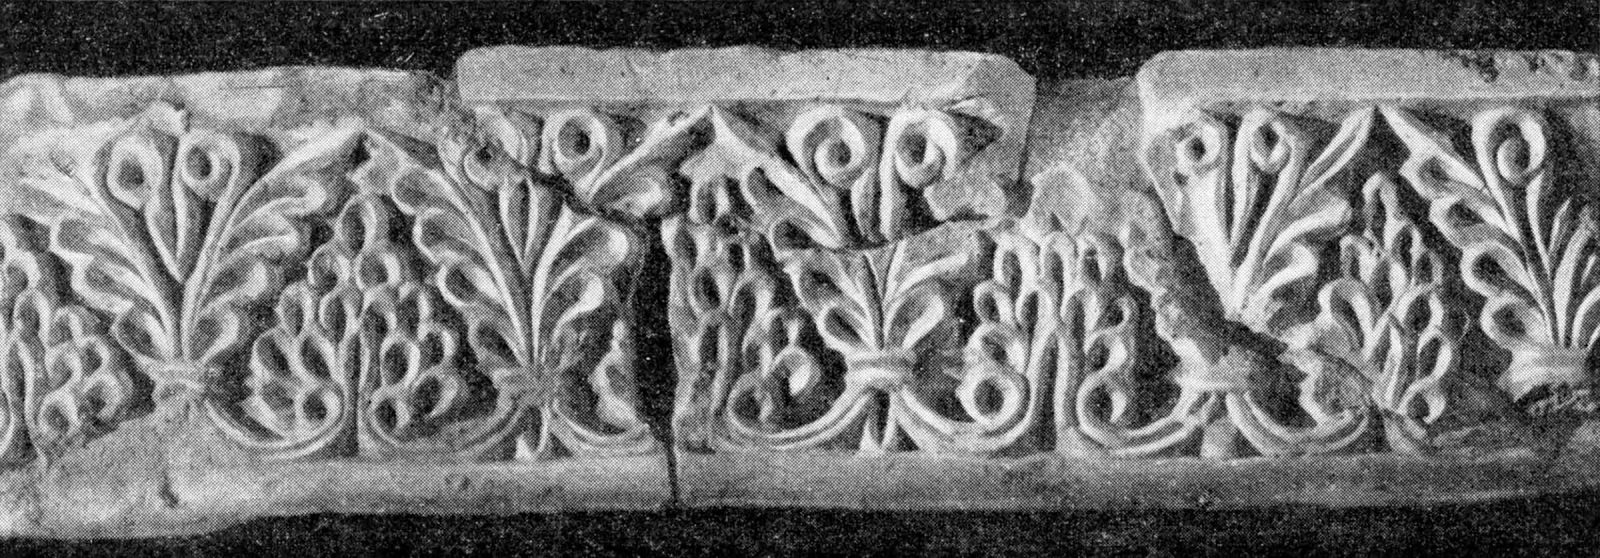 This stucco fragment, featuring a floral scroll, once decorated the large iwan at Varakhsha.